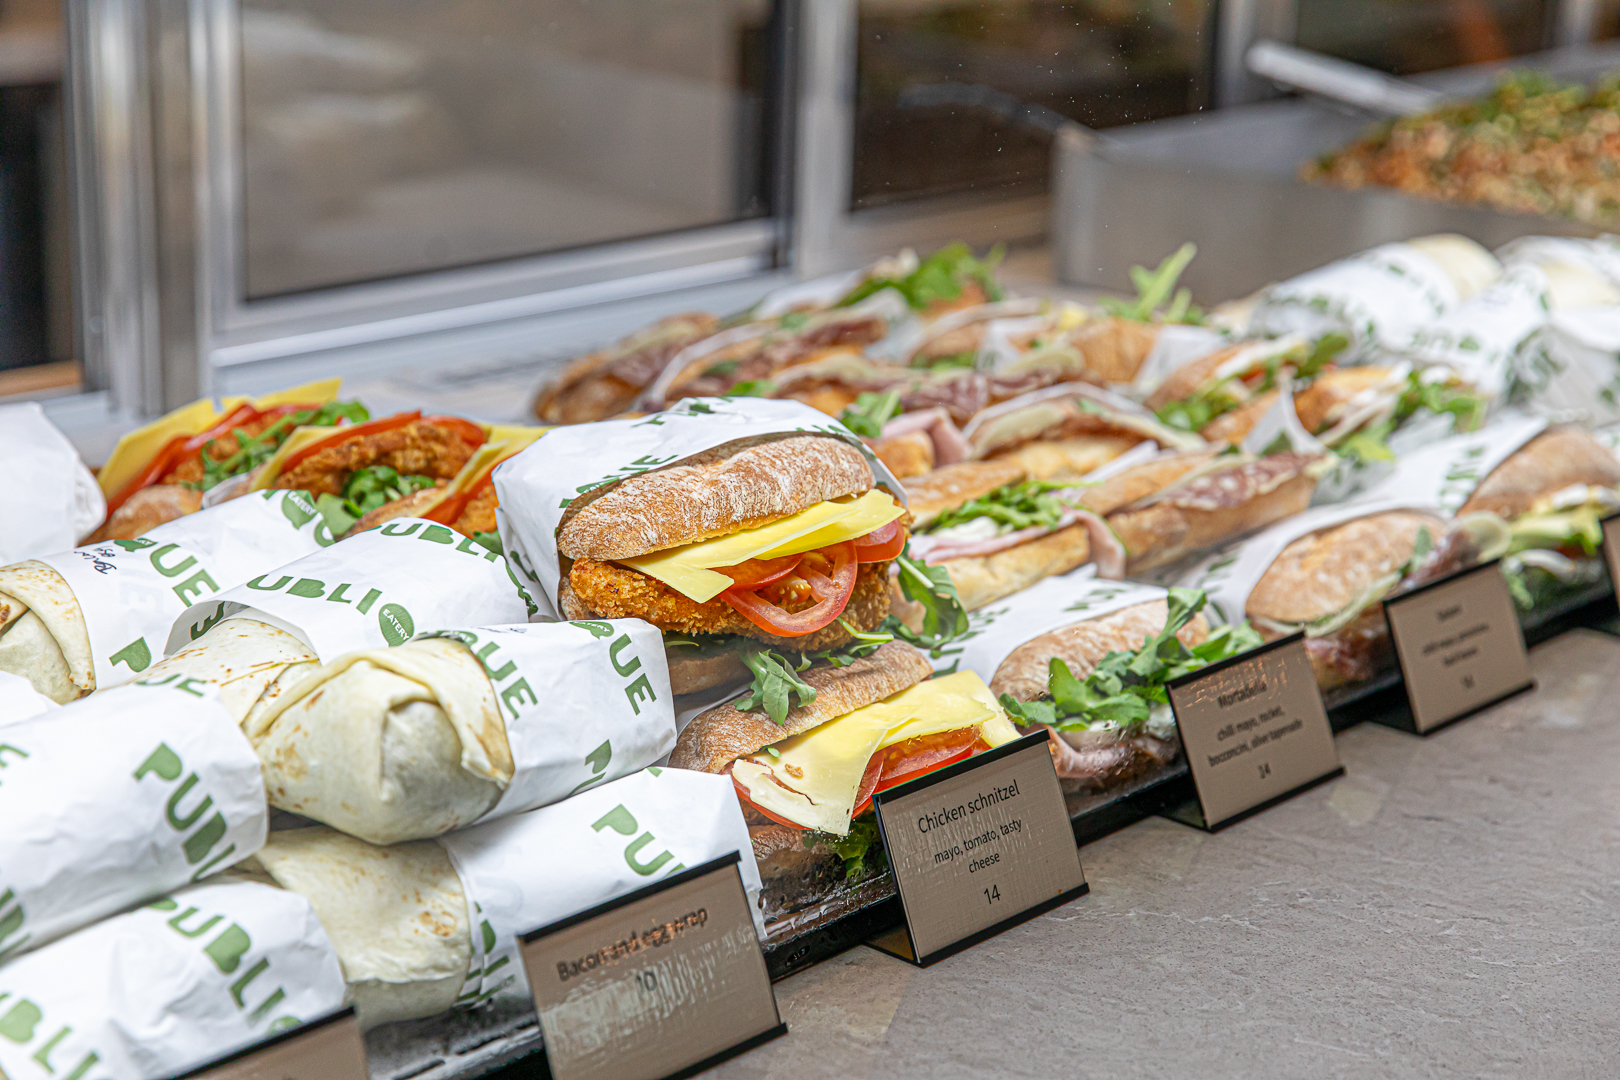 Sandwiches on display at cafe